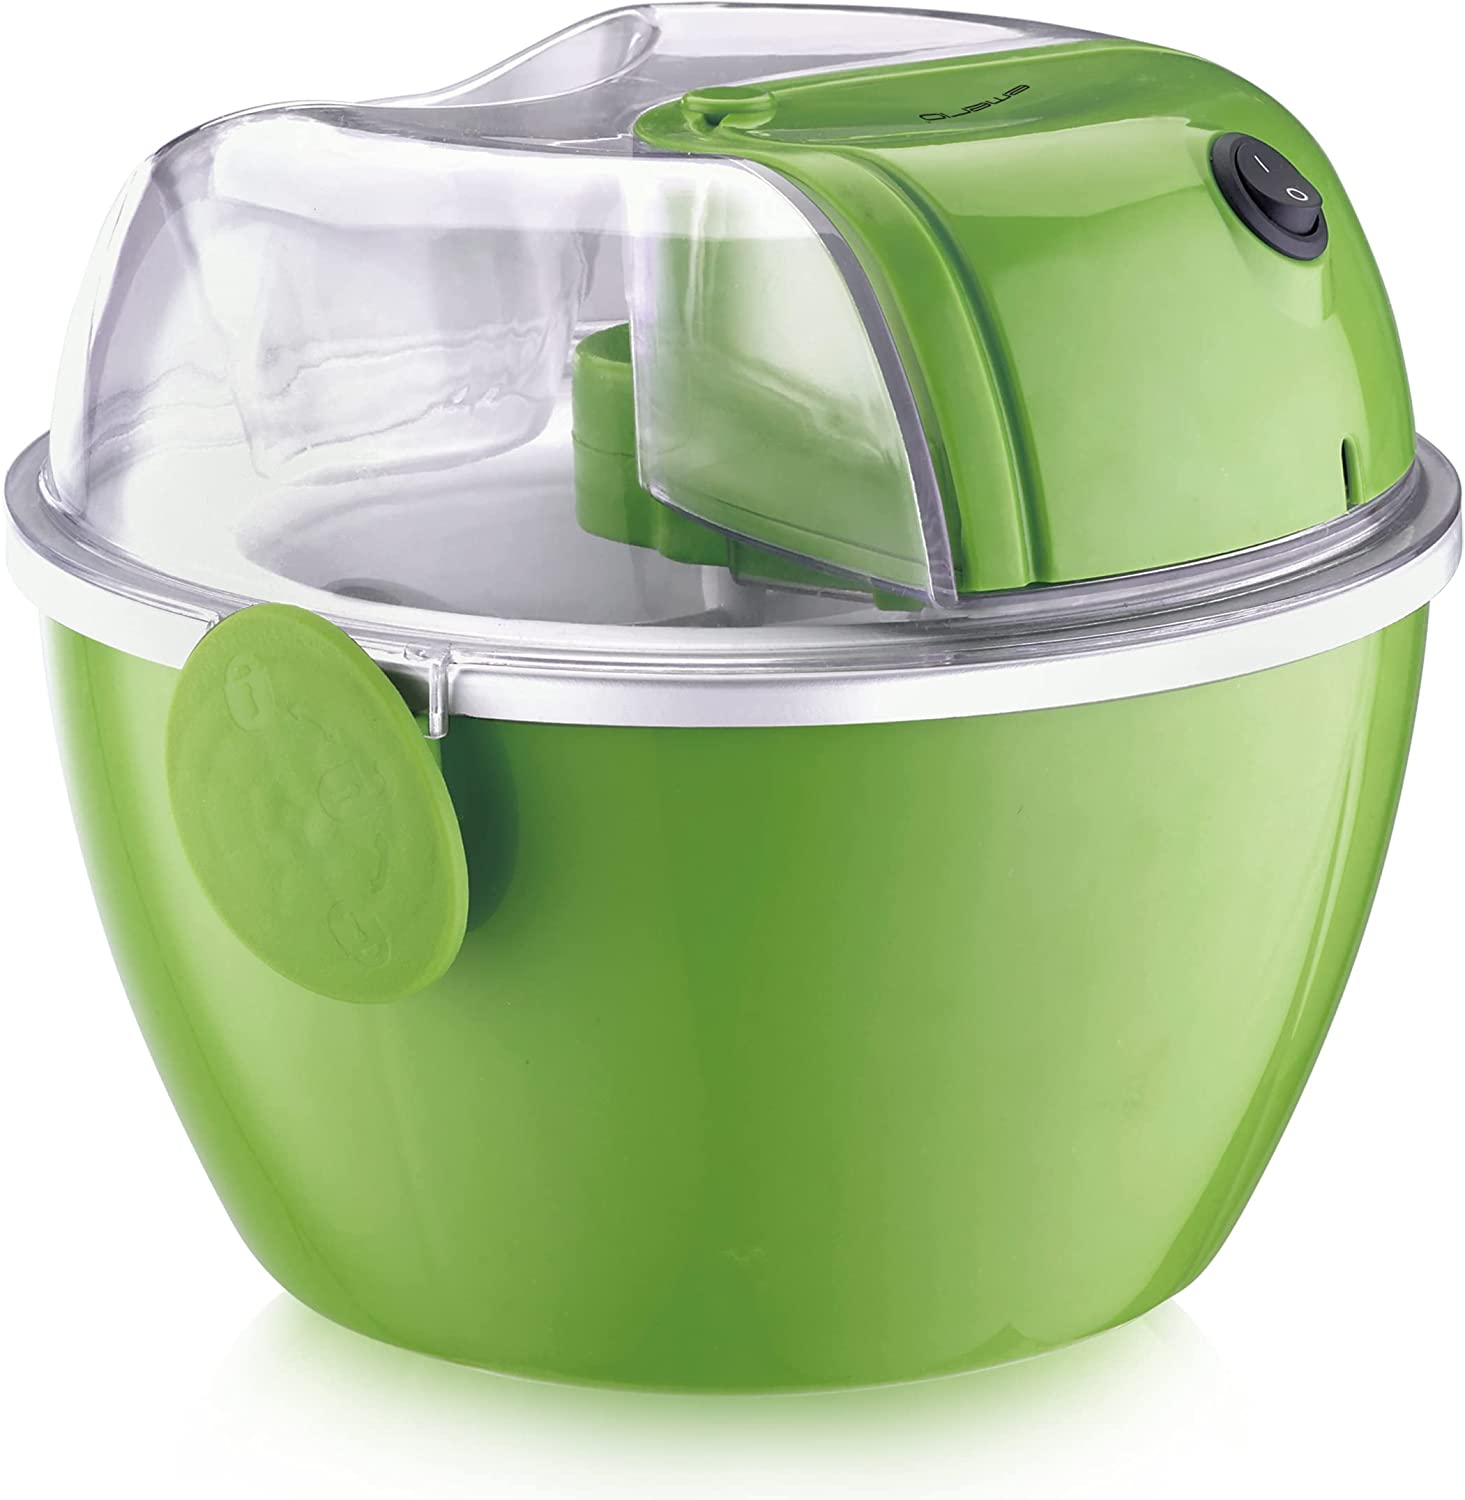 Emerio IC-201930 Ice Cream Maker 1 Litre Capacity with Filling Lid Green